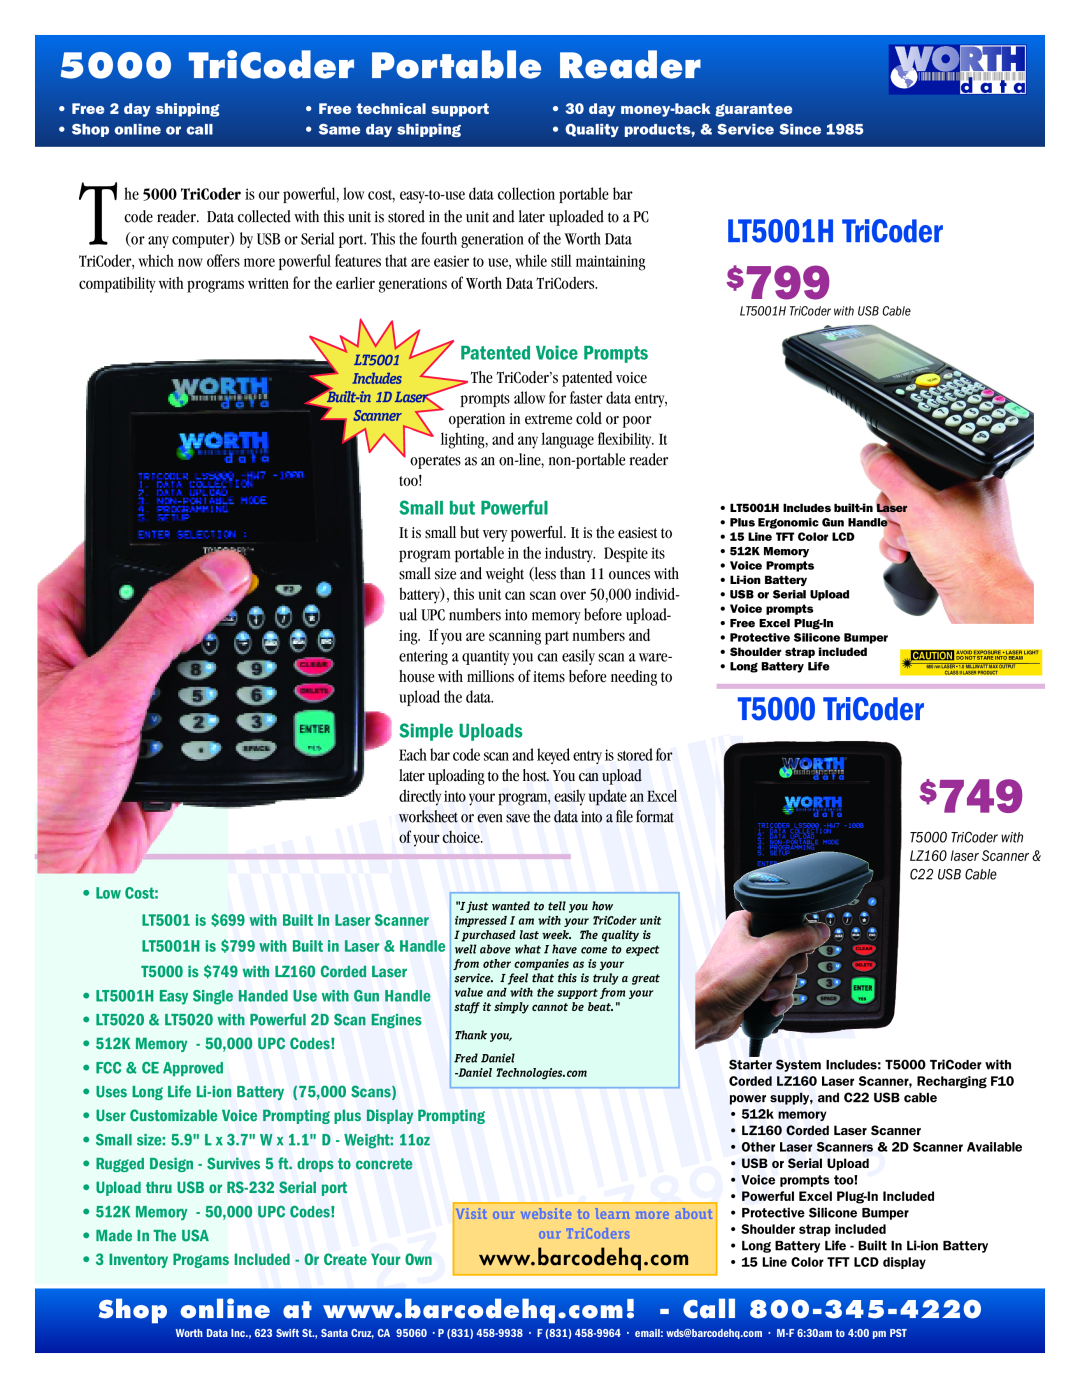 Worth Data manual $799, $749, TriCoder Portable Reader, LT5001H TriCoder, T5000 TriCoder, Low Cost, FCC & CE Approved 